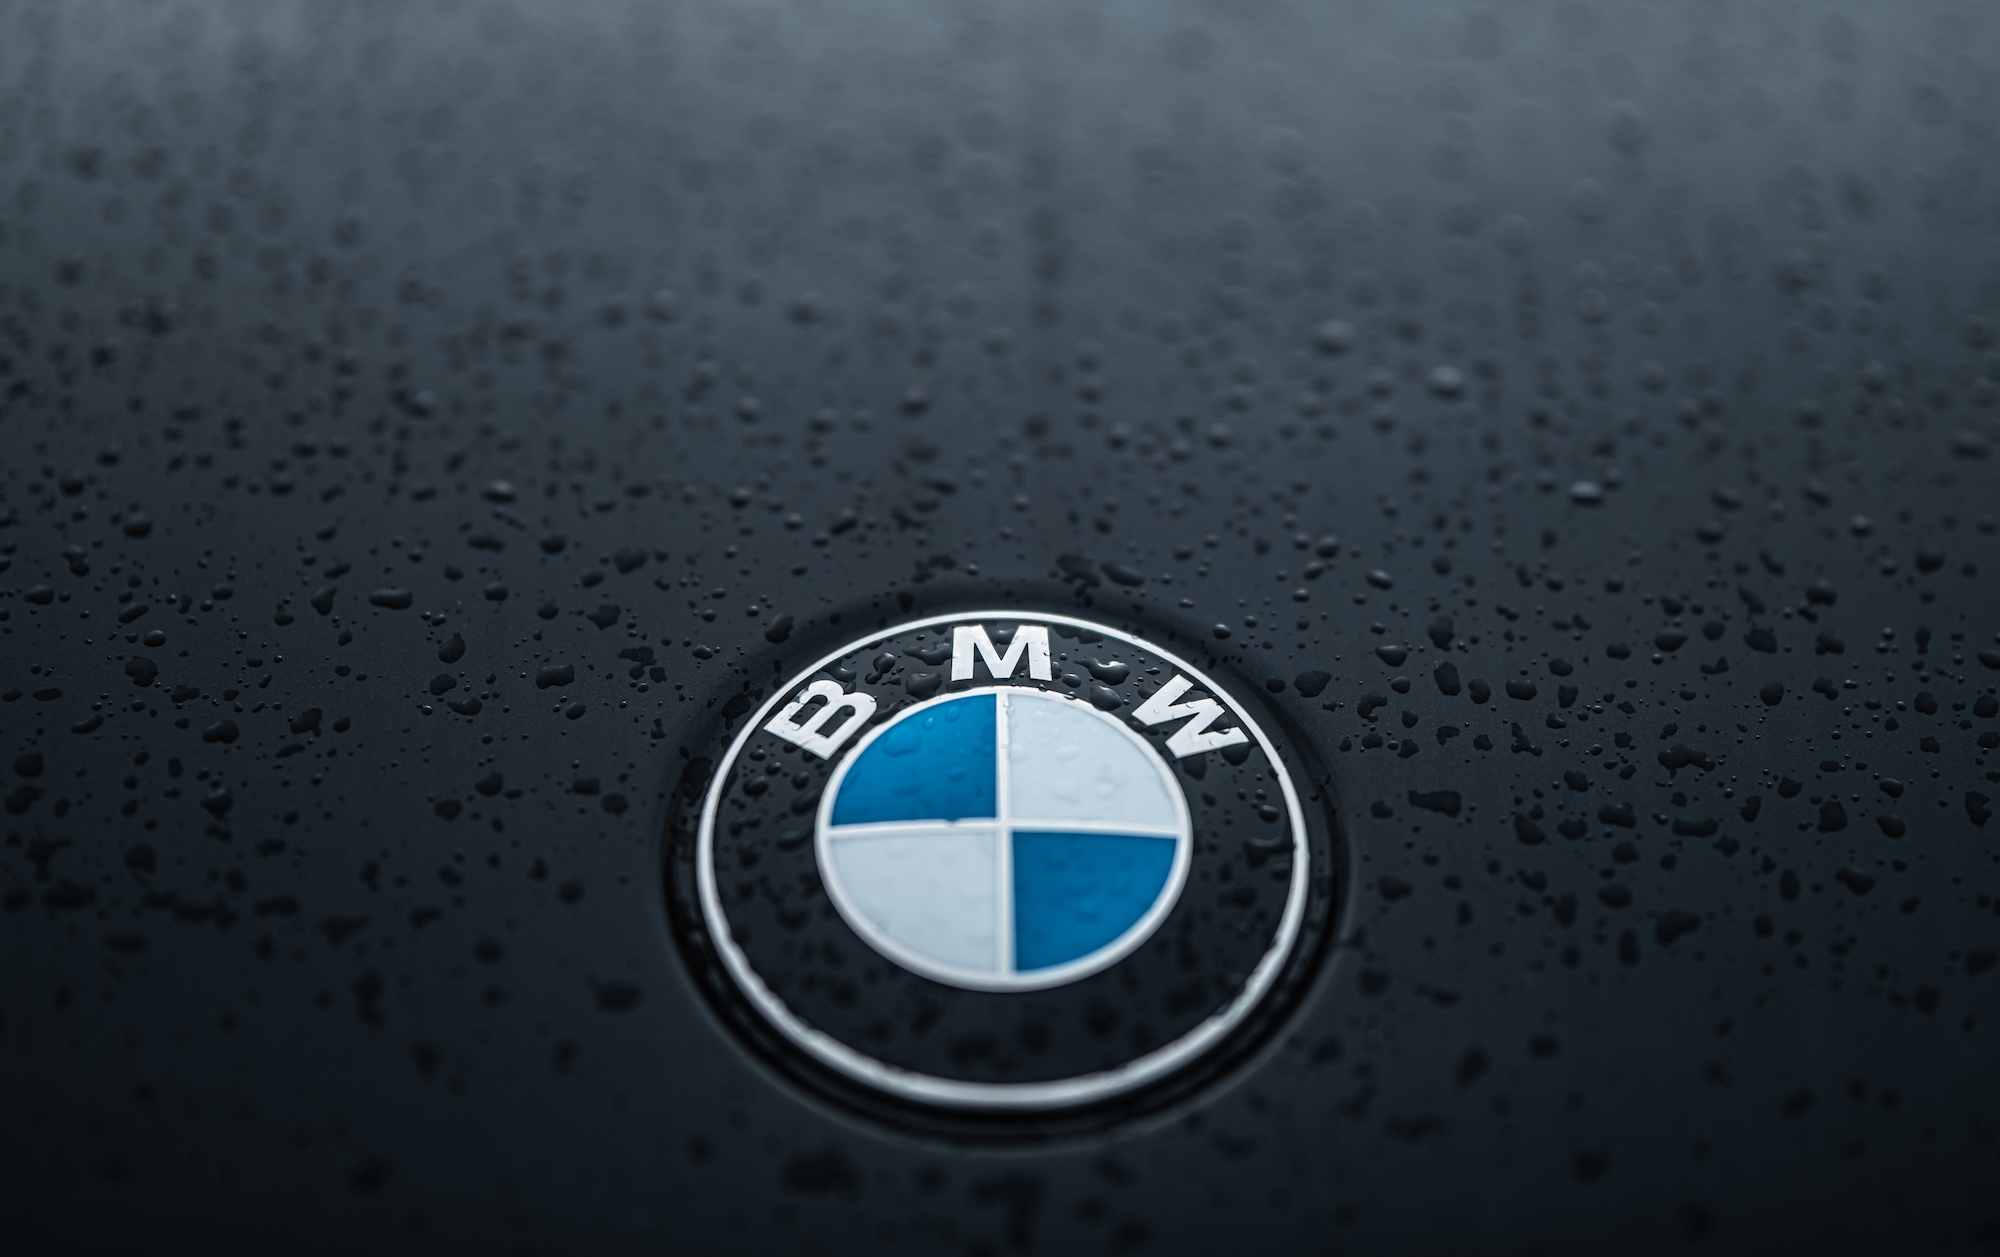 Drops of water can be seen after a rain shower on the logo and the hood on a BMW 520d